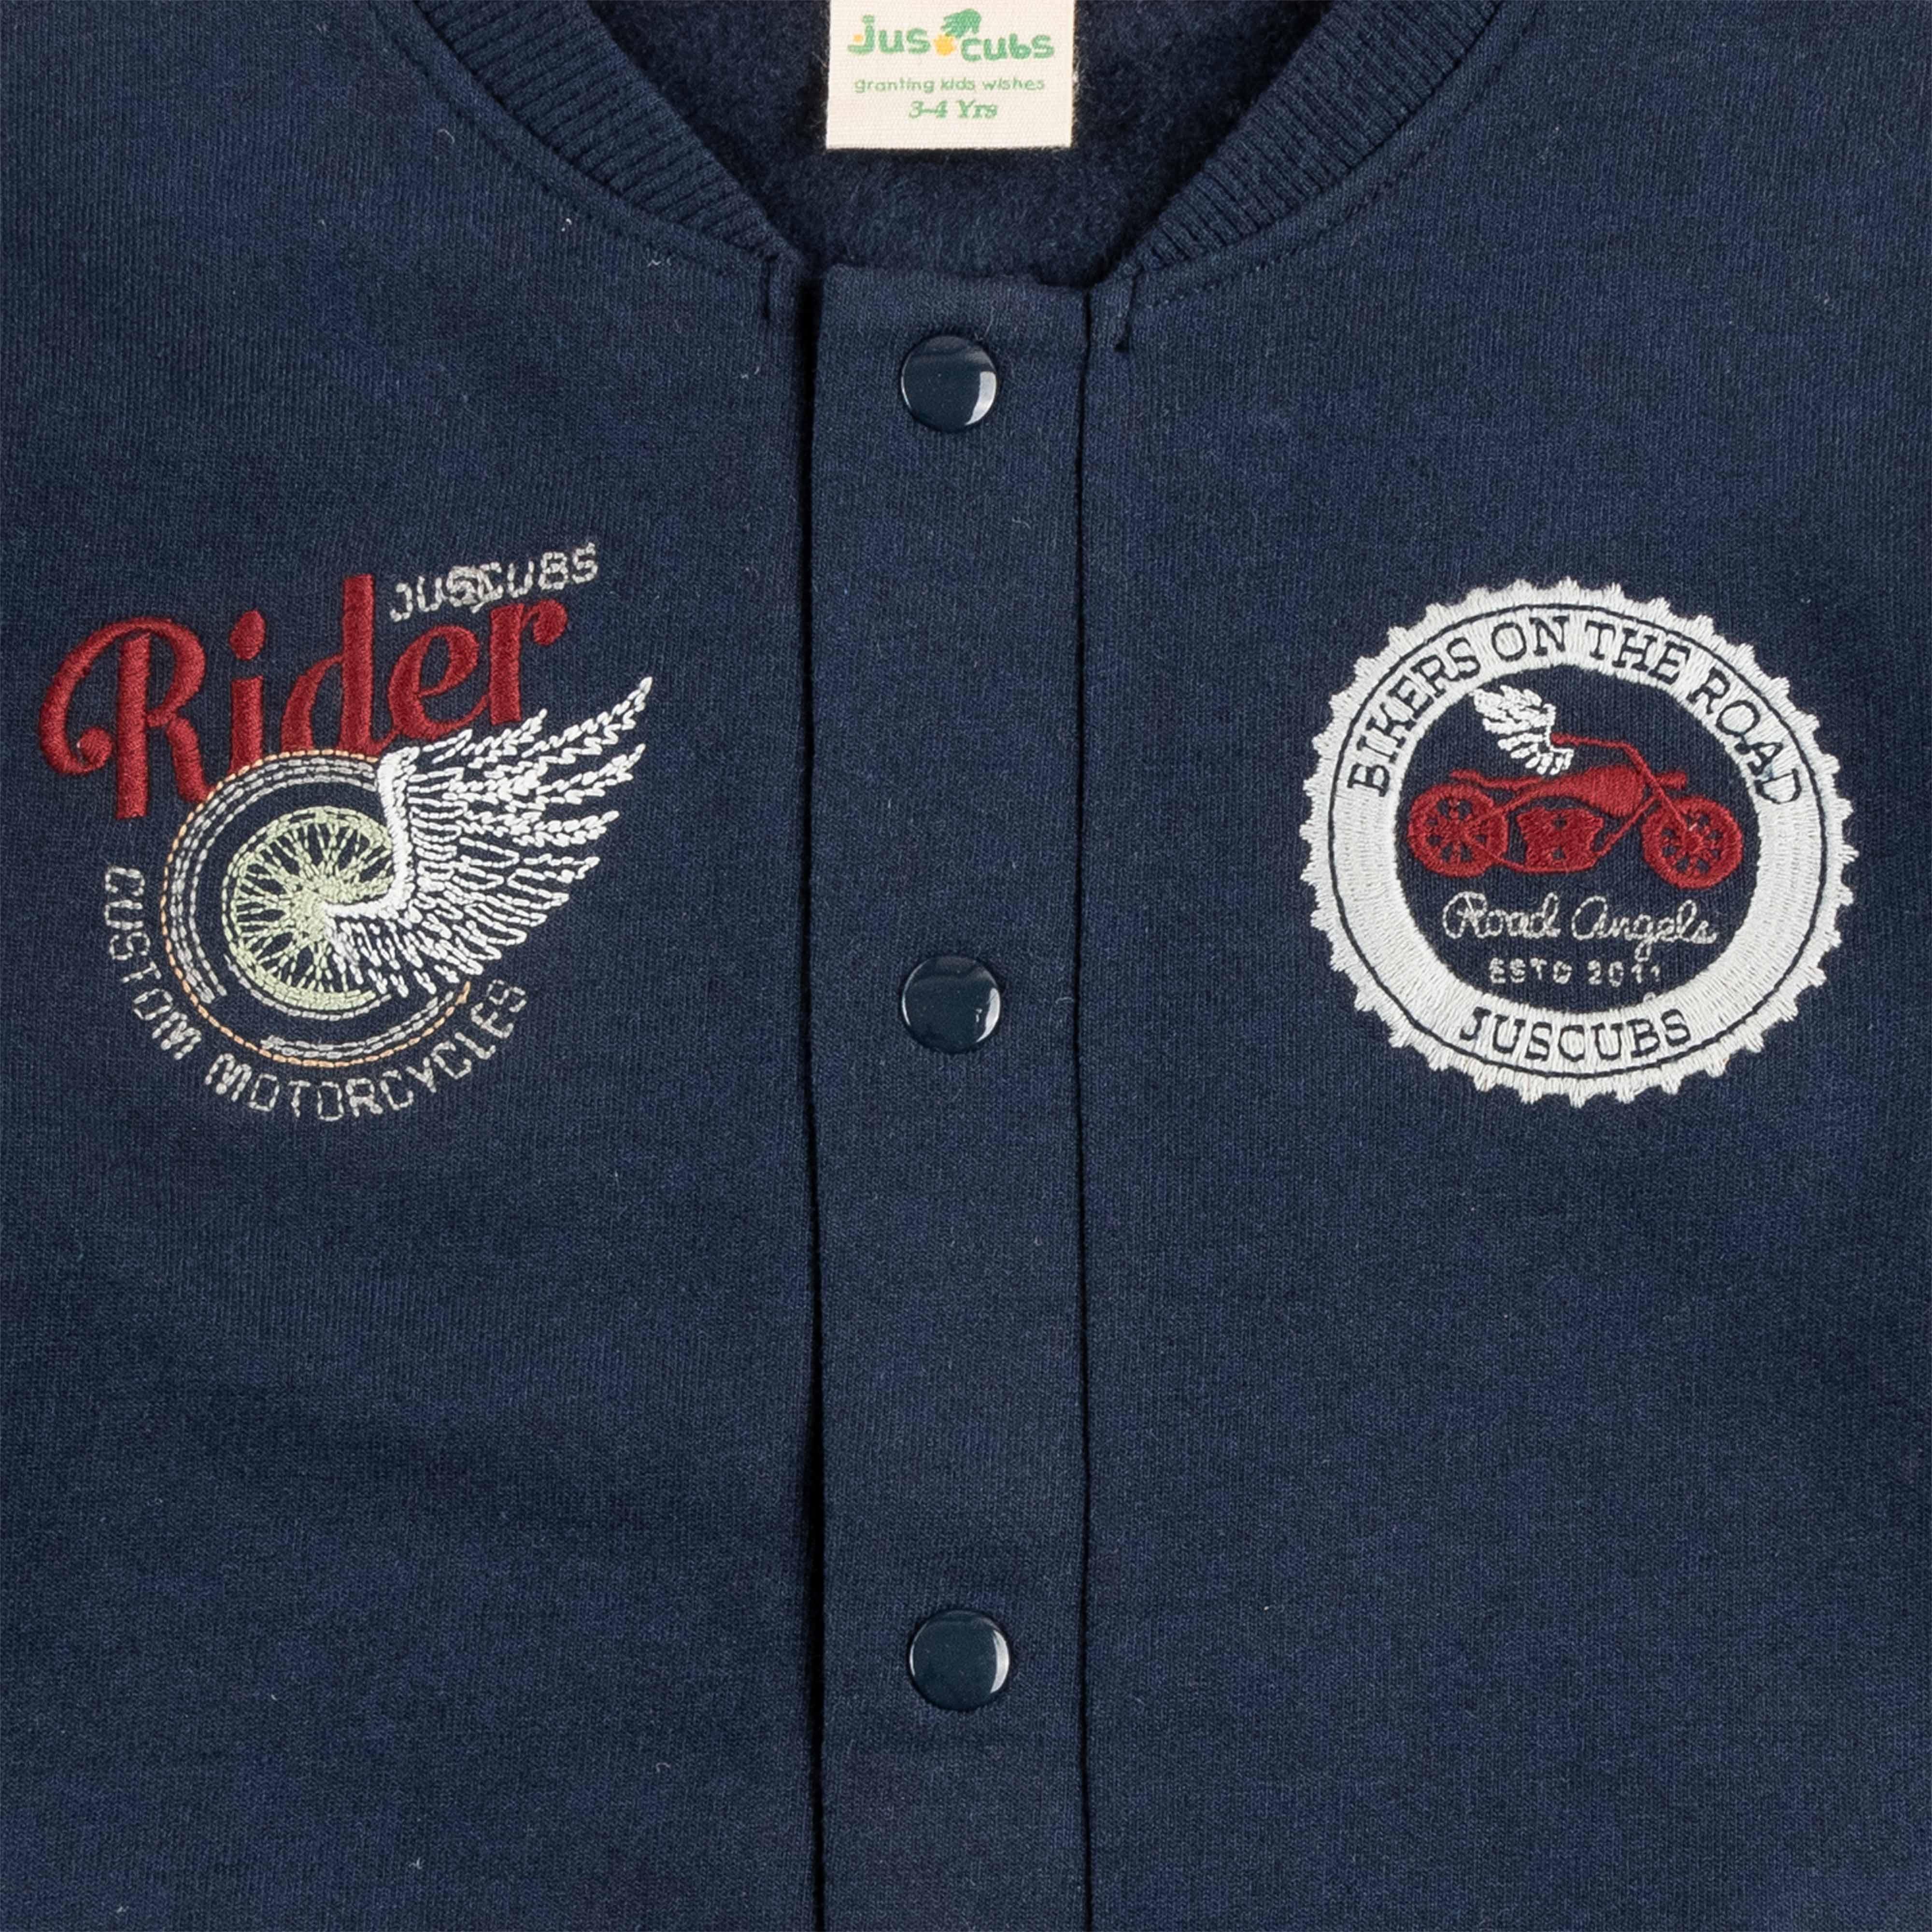 Young Boys Full Sleeve Rider Embroidery Jacket - Juscubs